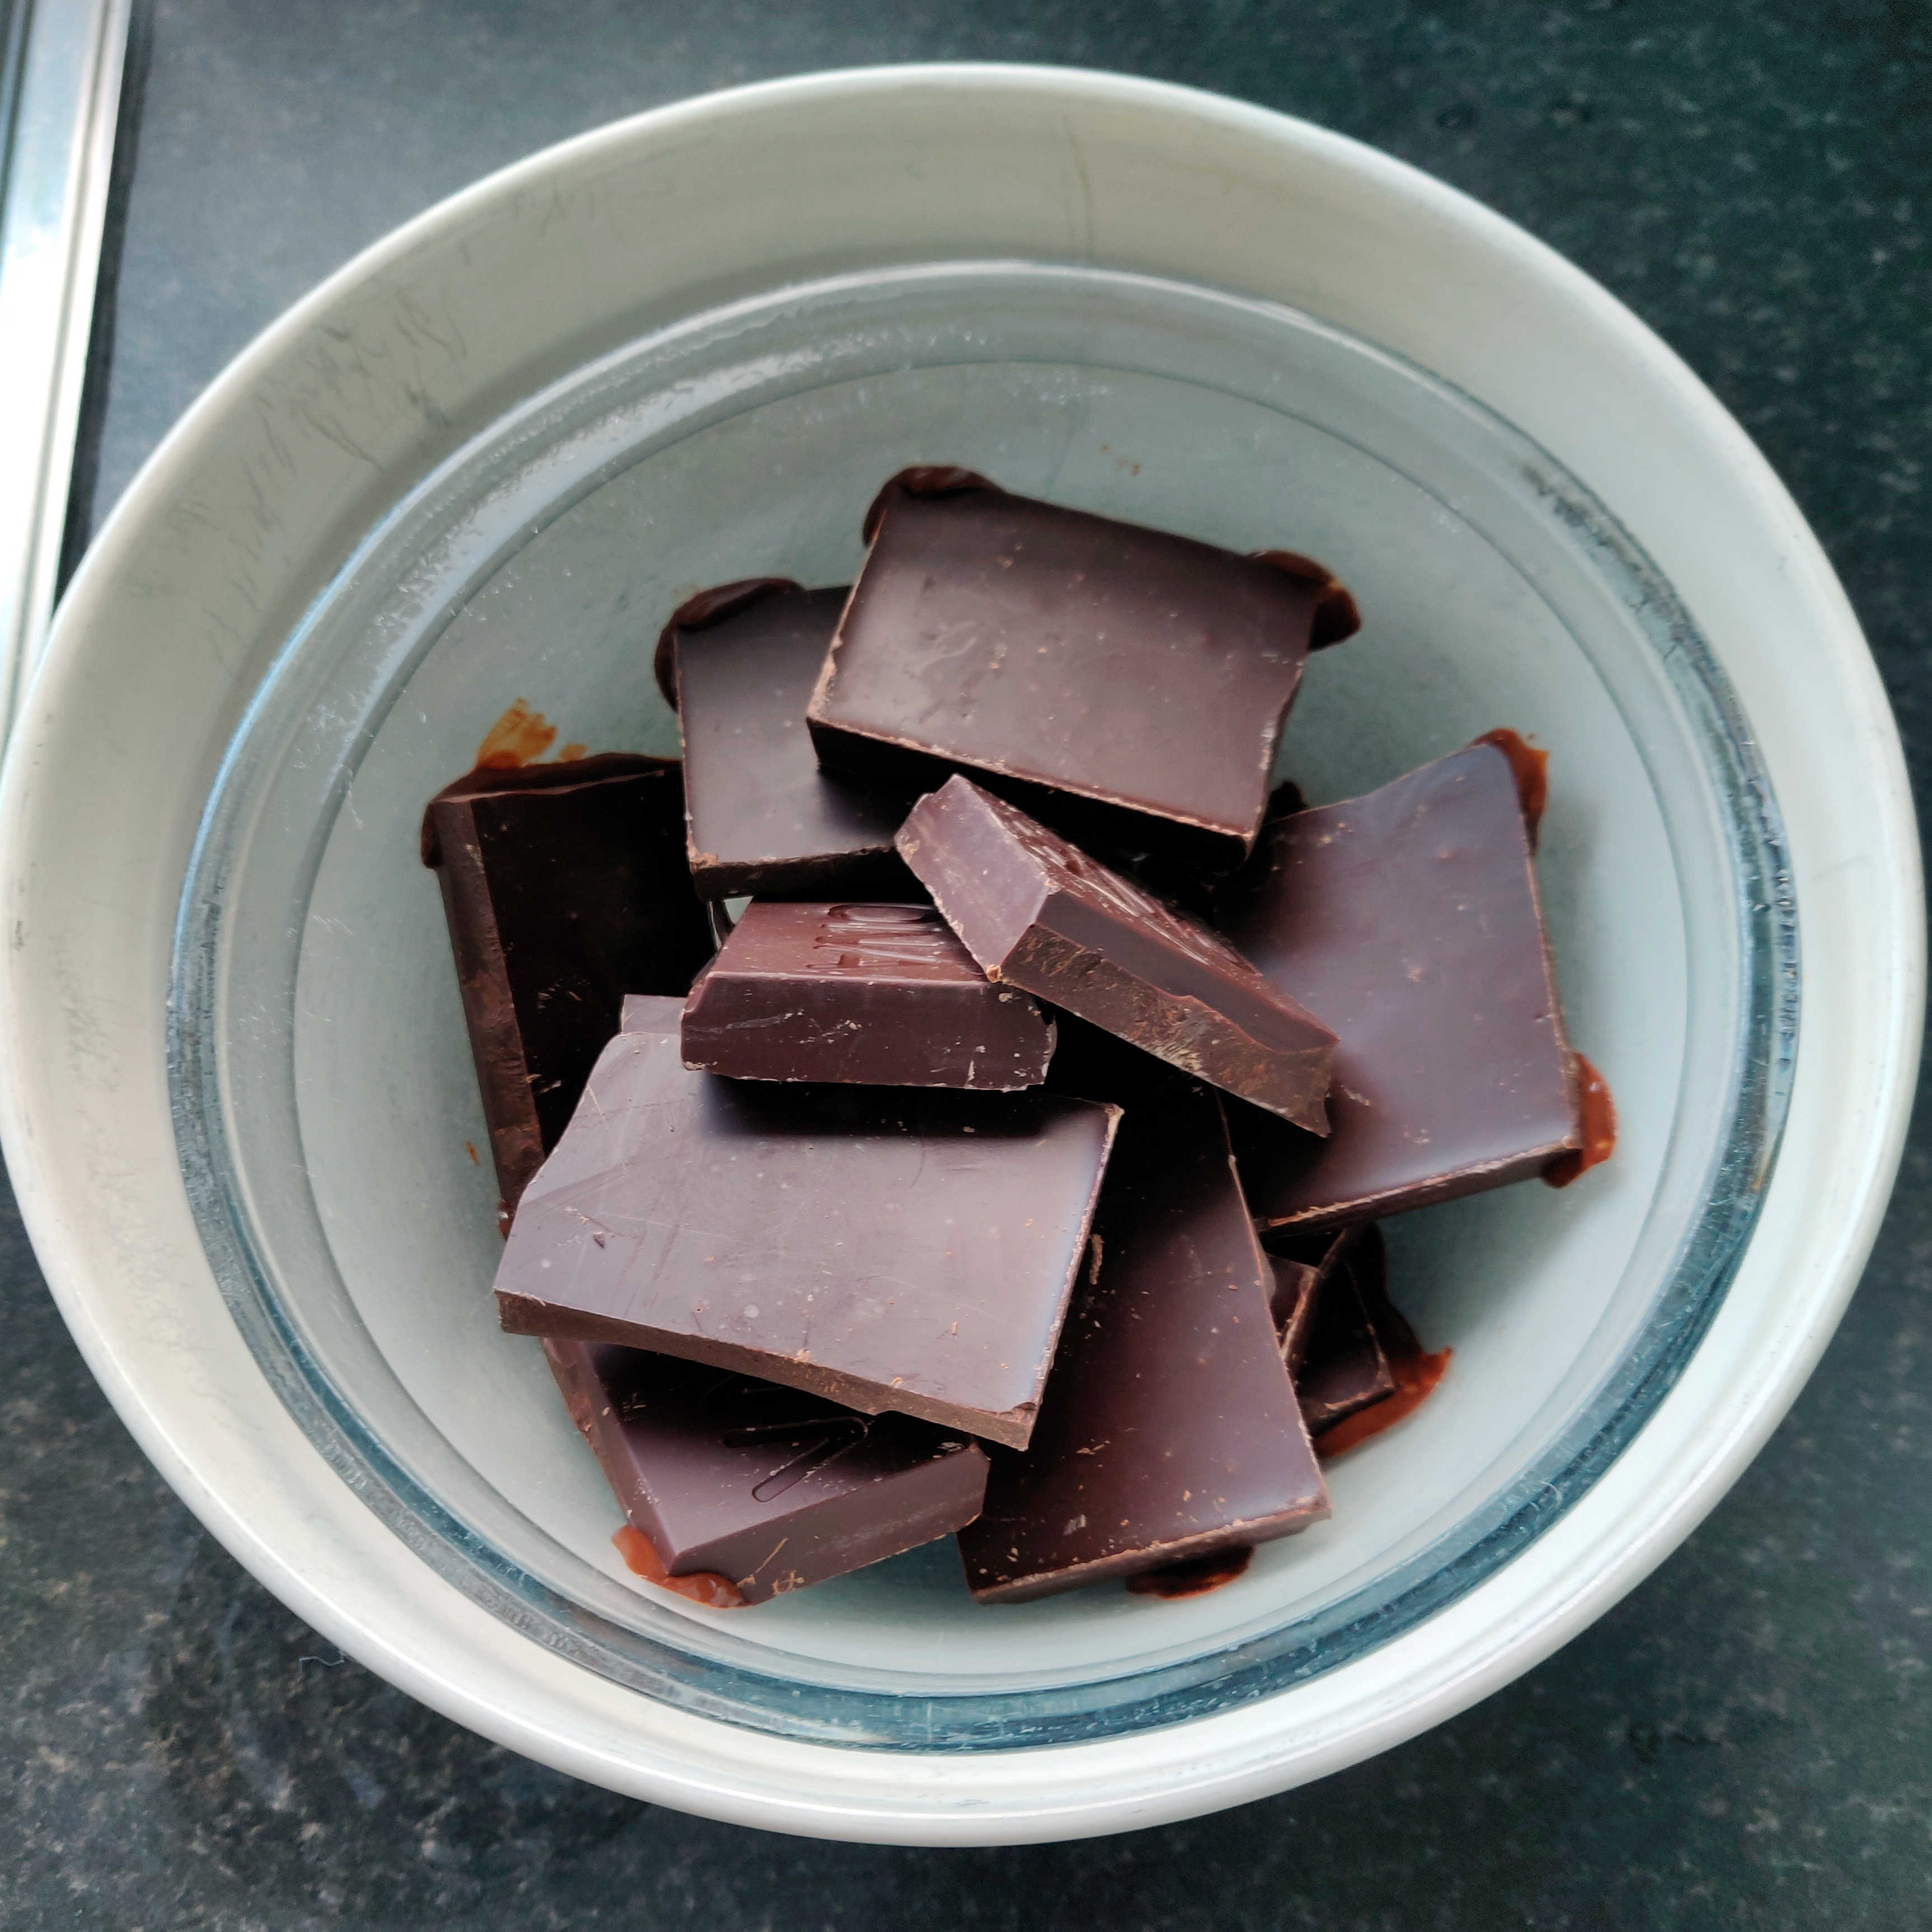 Broken chocolate set to melt in double bowl